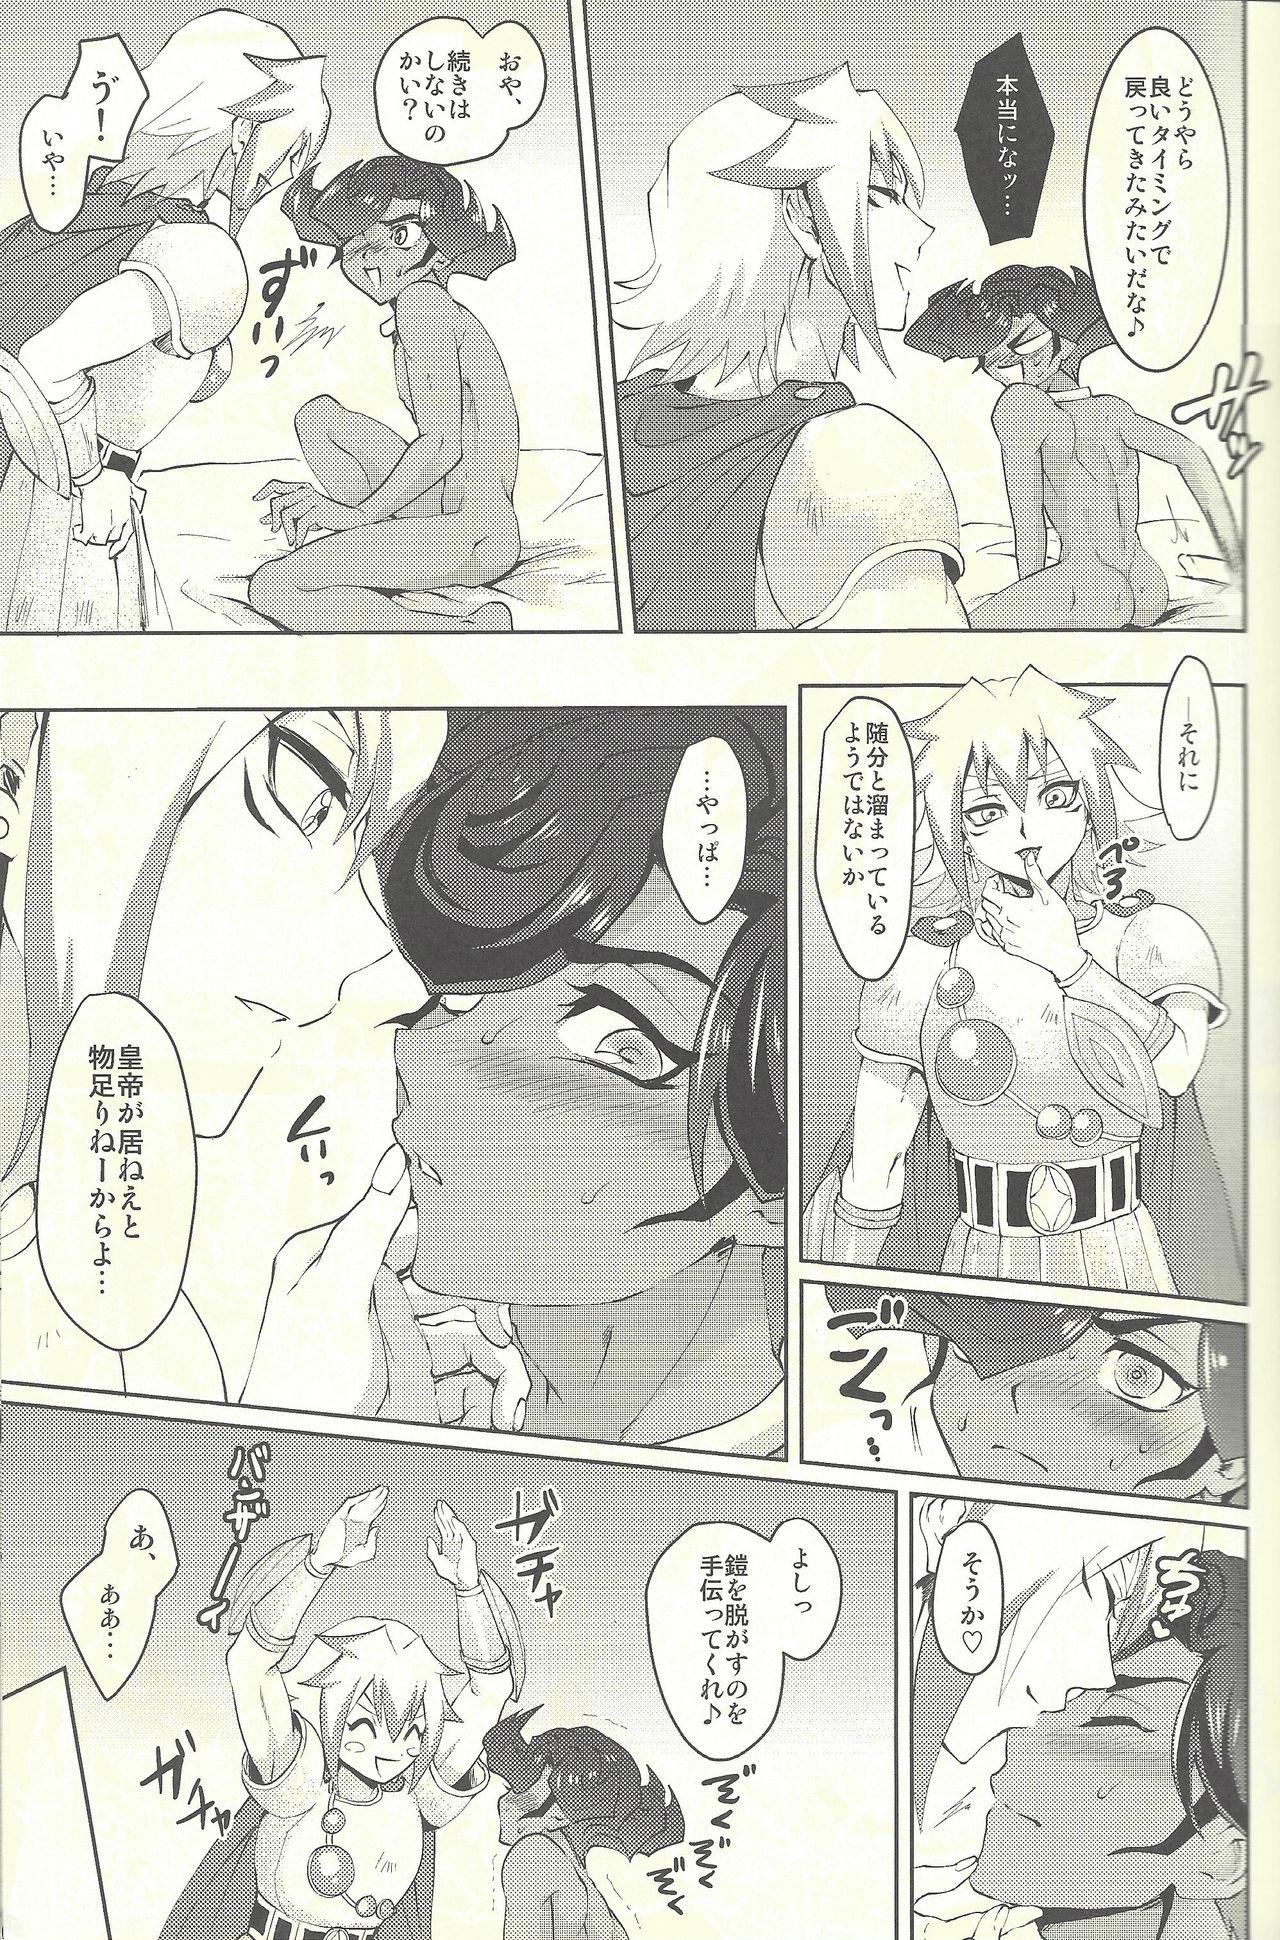 Role Play Emperor's Love!take 2 - Yu-gi-oh zexal Sislovesme - Page 10